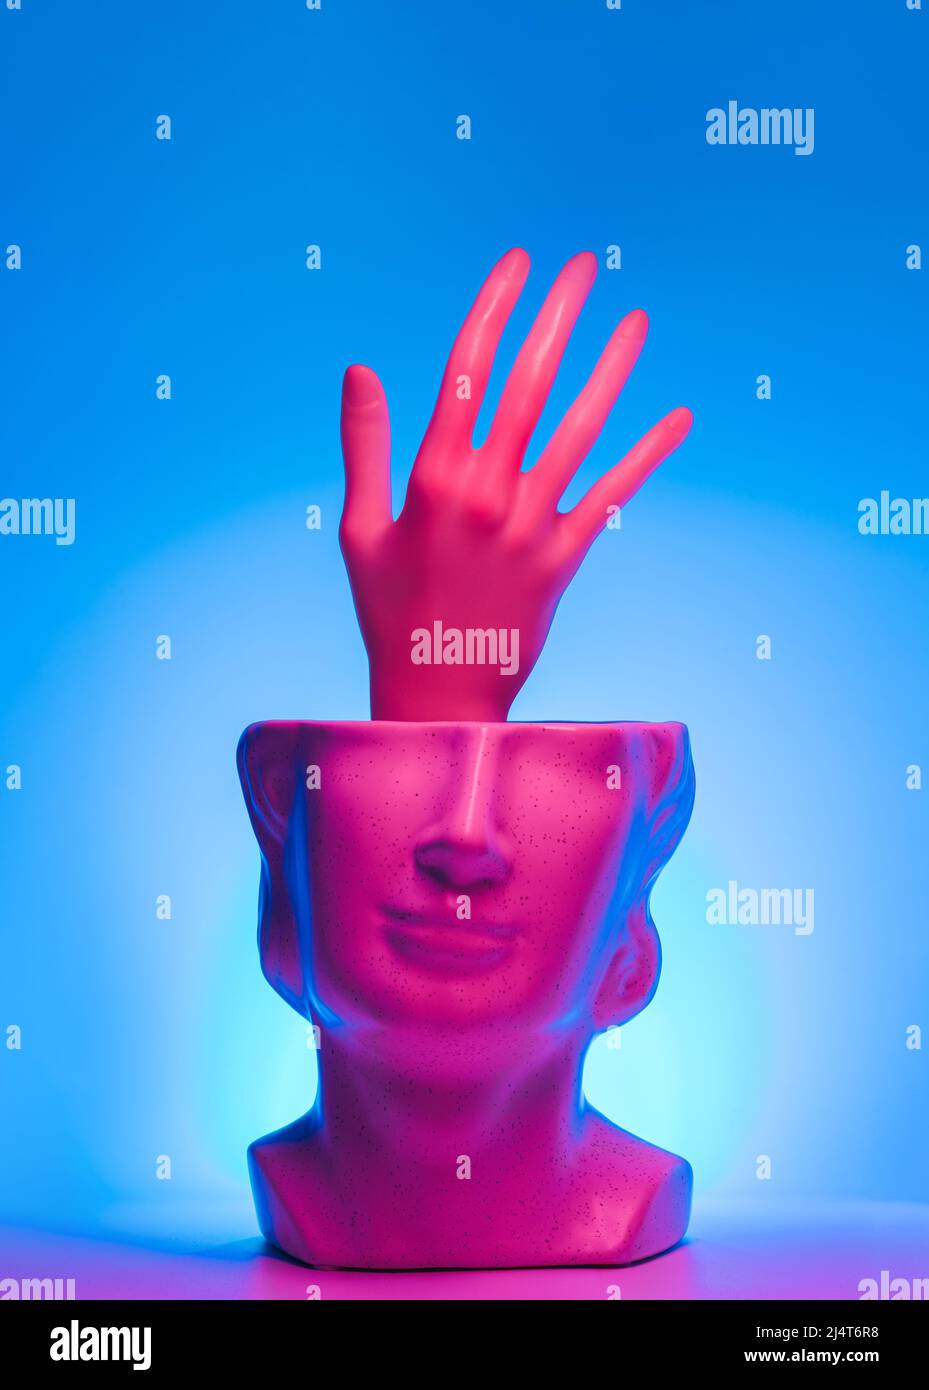 Hand reaching out from statue head and magenta teal led lights. Neon, help surreal concept. Stock Photo